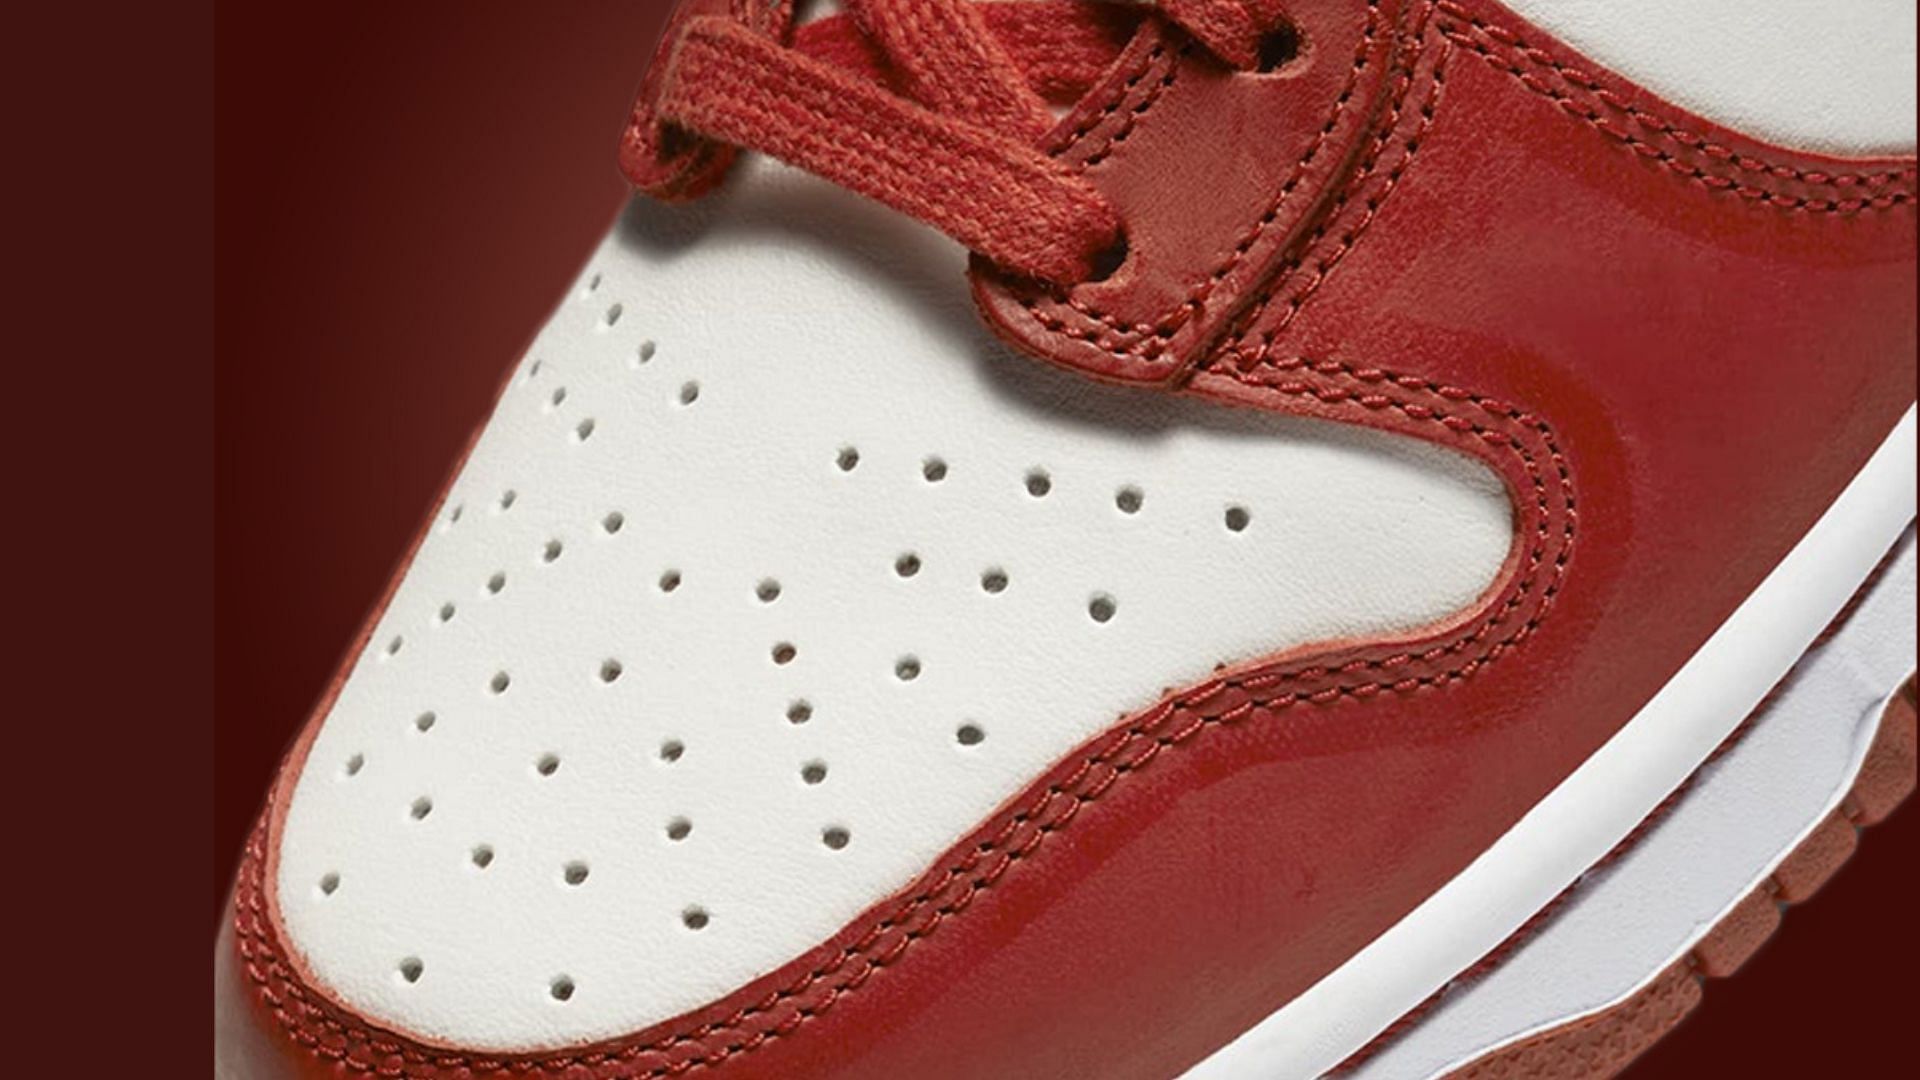 Here&#039;s a detailed look at the toe tops of the impending Dunk High Cinnabar shoes (Image via Nike)